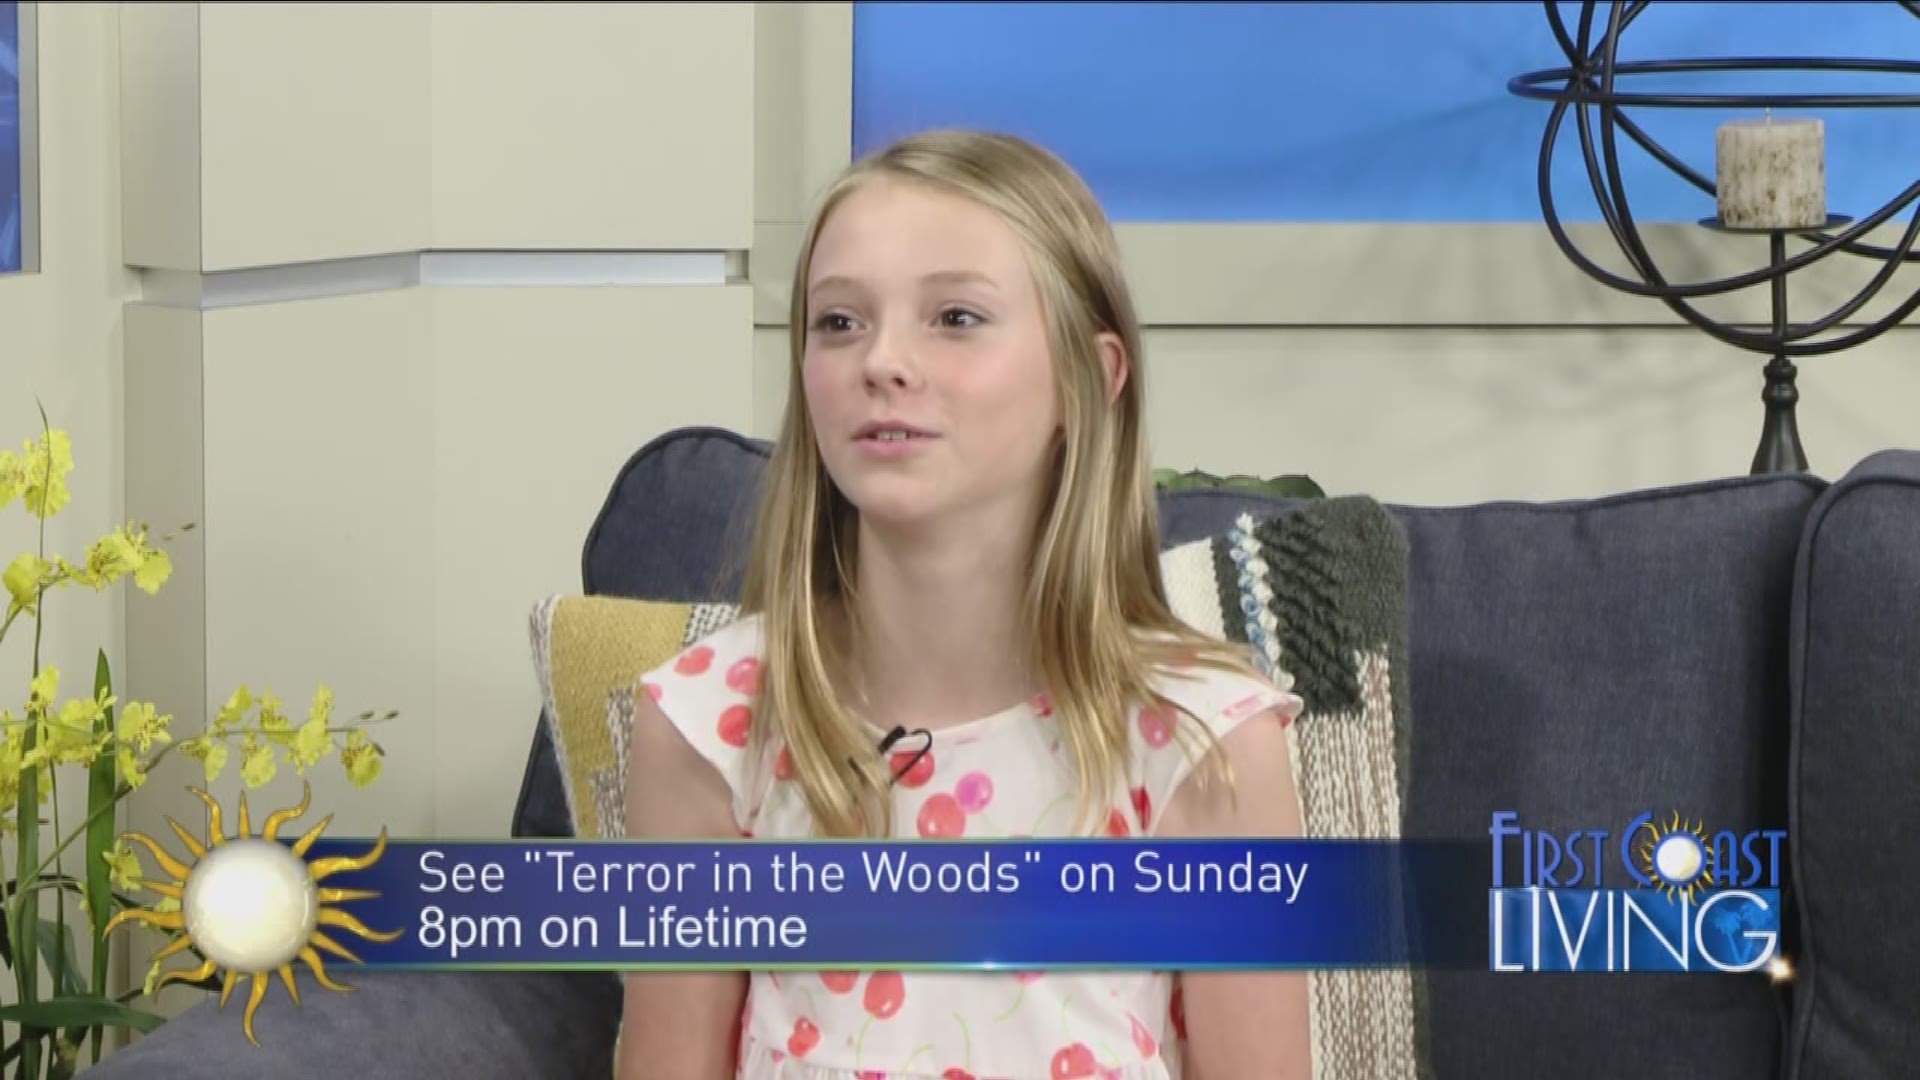 See "Terror in the Woods" on Sunday 8pm on Lifetime